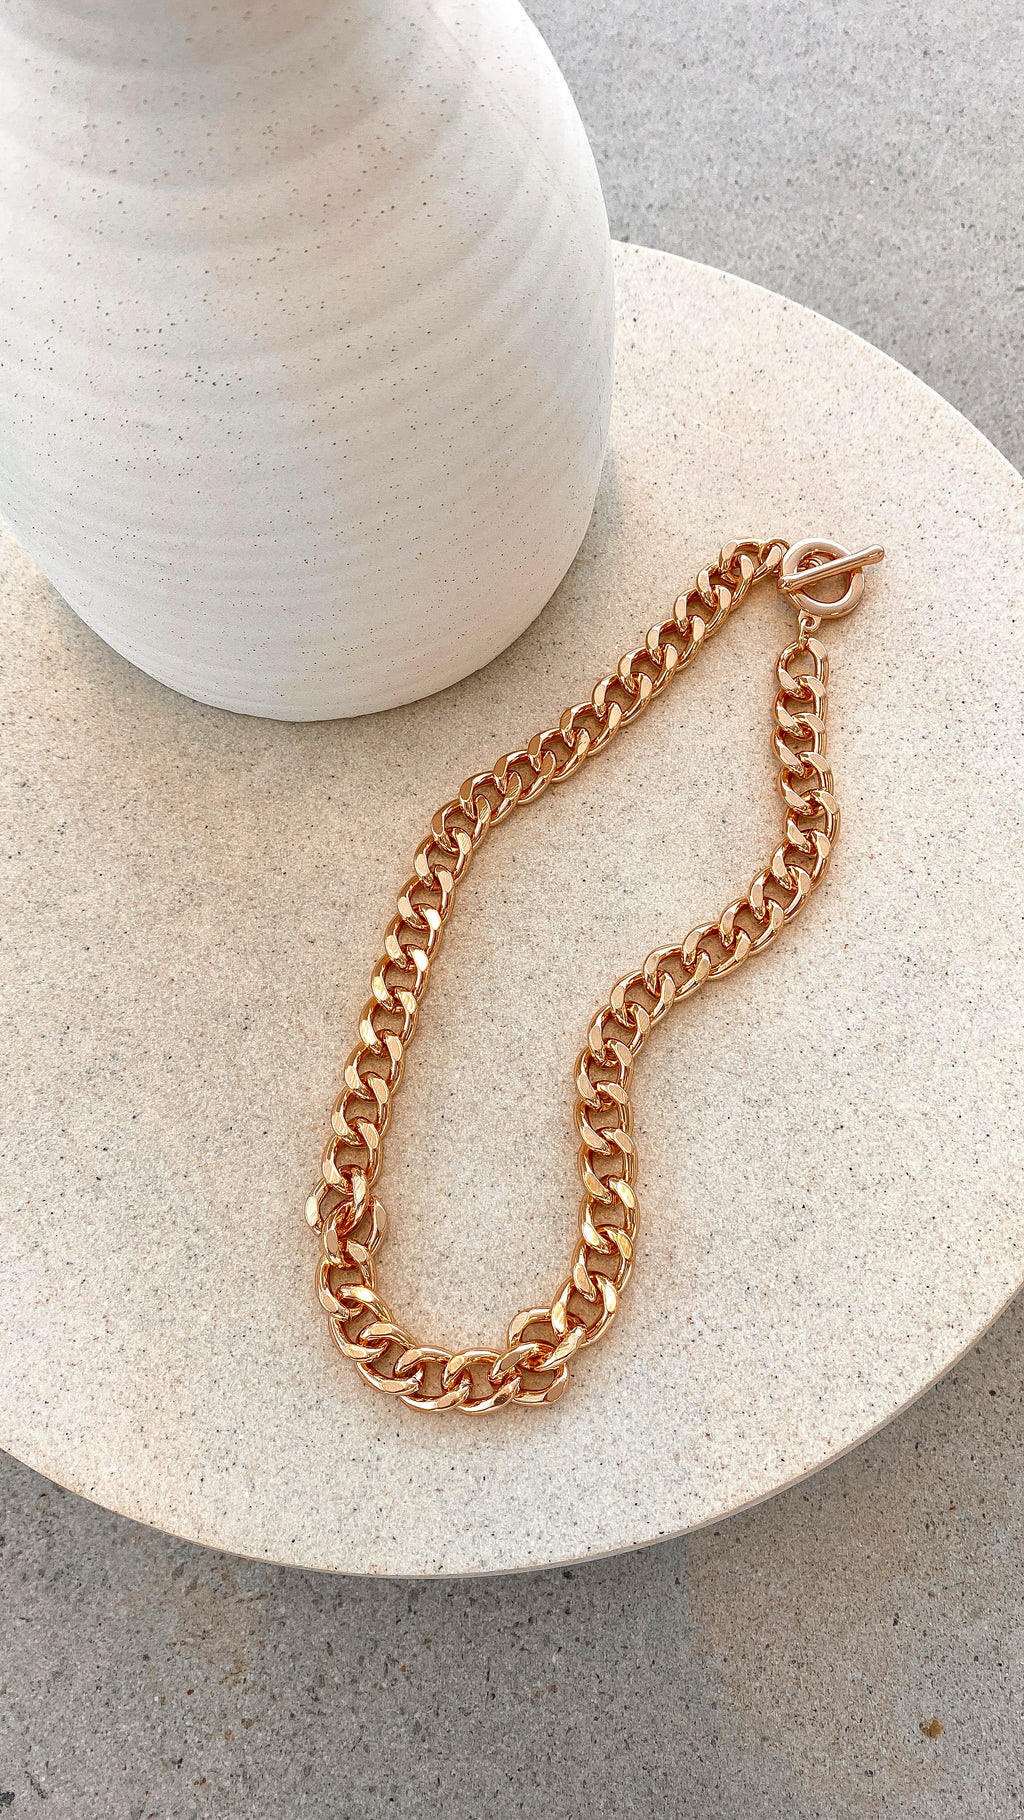 Chunky Fob Chain Necklace - Gold